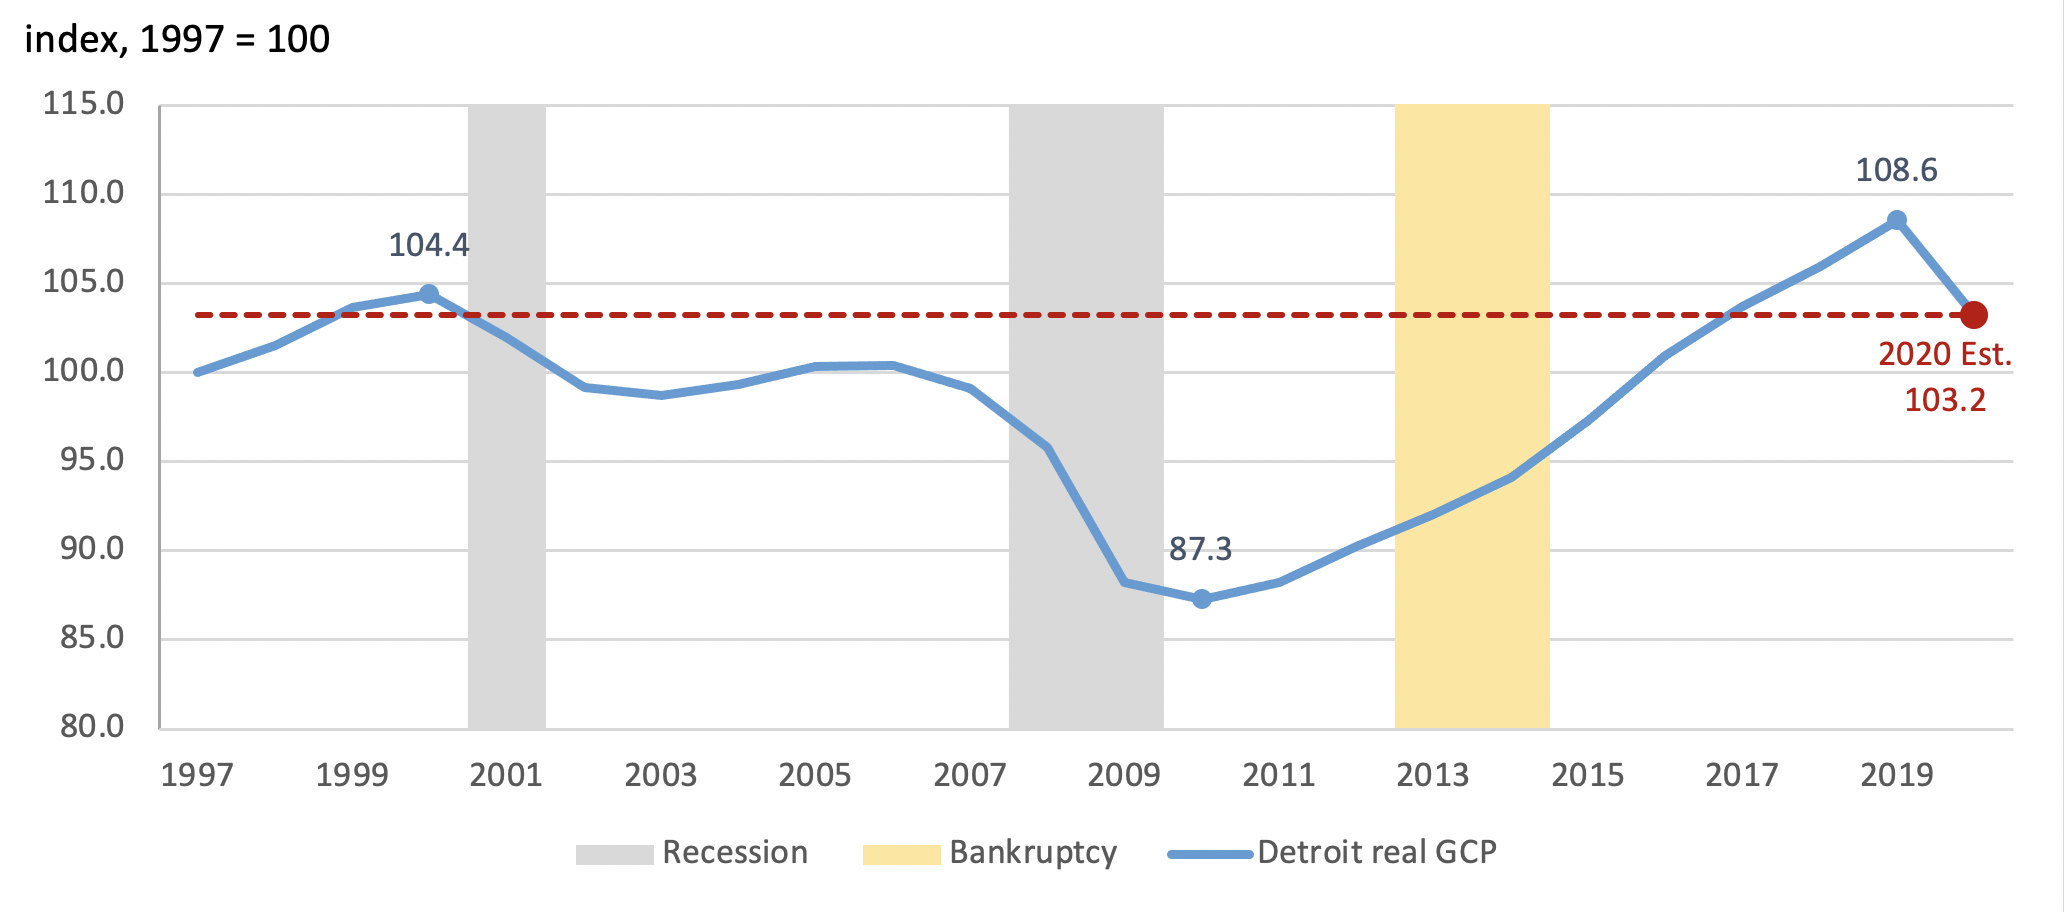 Figure 3 is a line chart that plots the Detroit Economic Activity Index model’s estimates for Detroit’s real gross city product, indexed to its 1997 level, from 1997 through 2020.